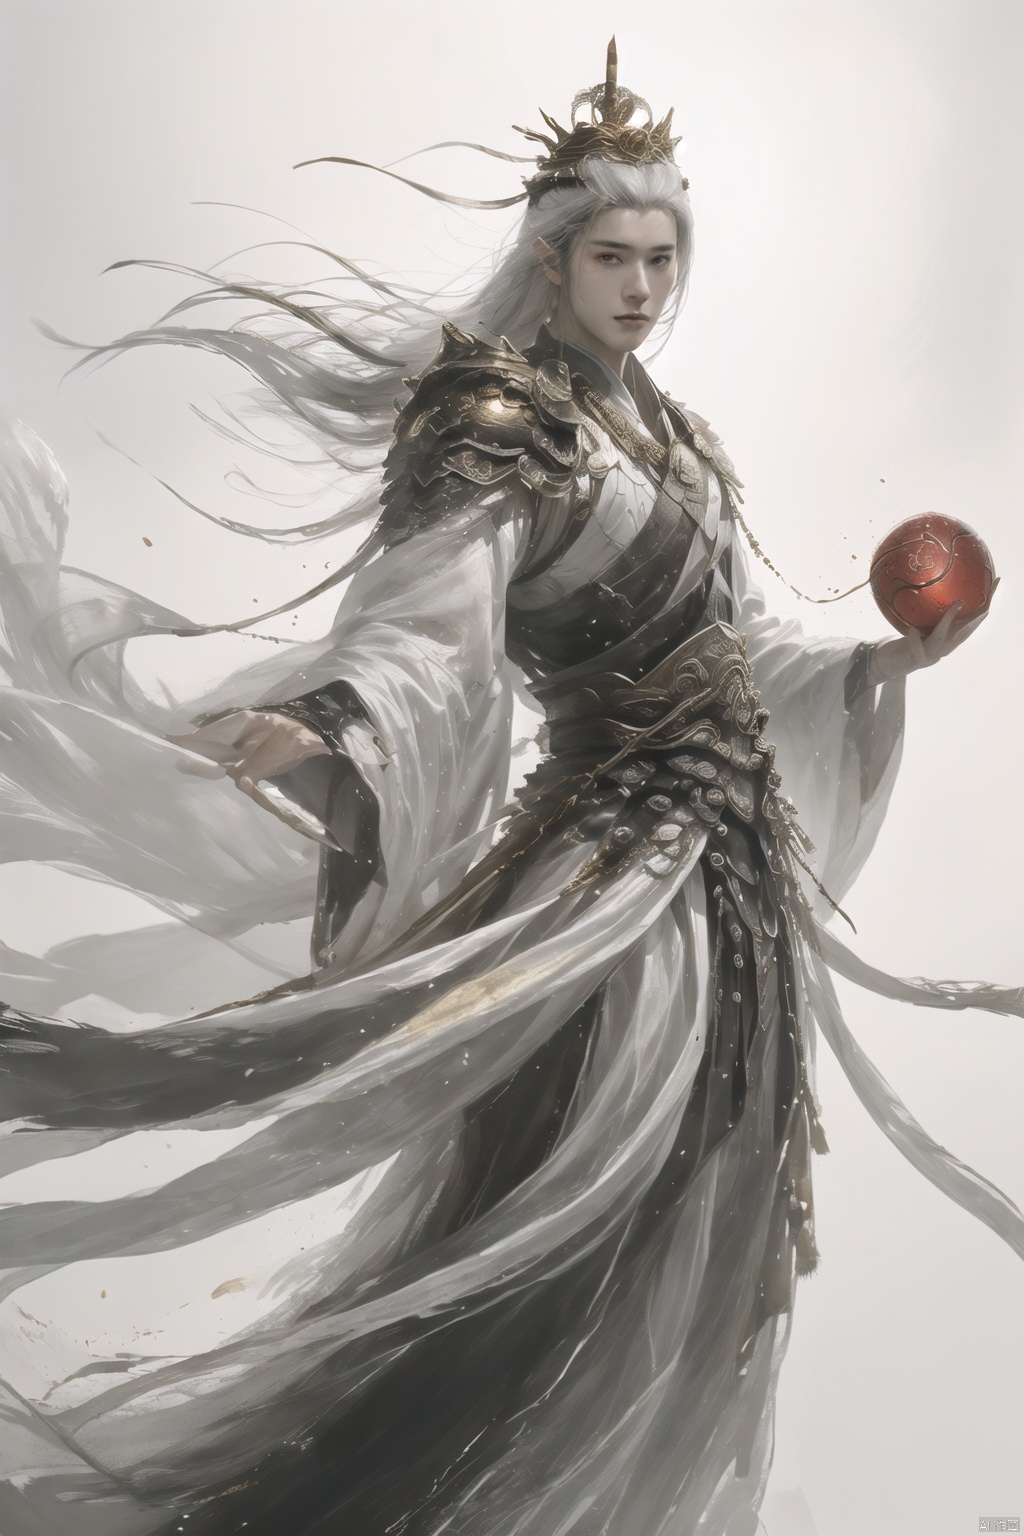 a woman with white hair holding a glowing ball in her hands, white haired deity, by Yang J, heise jinyao, inspired by Zhang Han, xianxia fantasy, flowing gold robes, inspired by Guan Daosheng, human and dragon fusion, cai xukun, inspired by Zhao Yuan, with long white hair, fantasy art style,,Ink scattering_Chinese style, smwuxia Chinese text blood weapon:sw, lotus leaf, (\shen ming shao nv\), gold armor, a boy_gmlwman, wunv,makeup,crown,tassel, , Armor